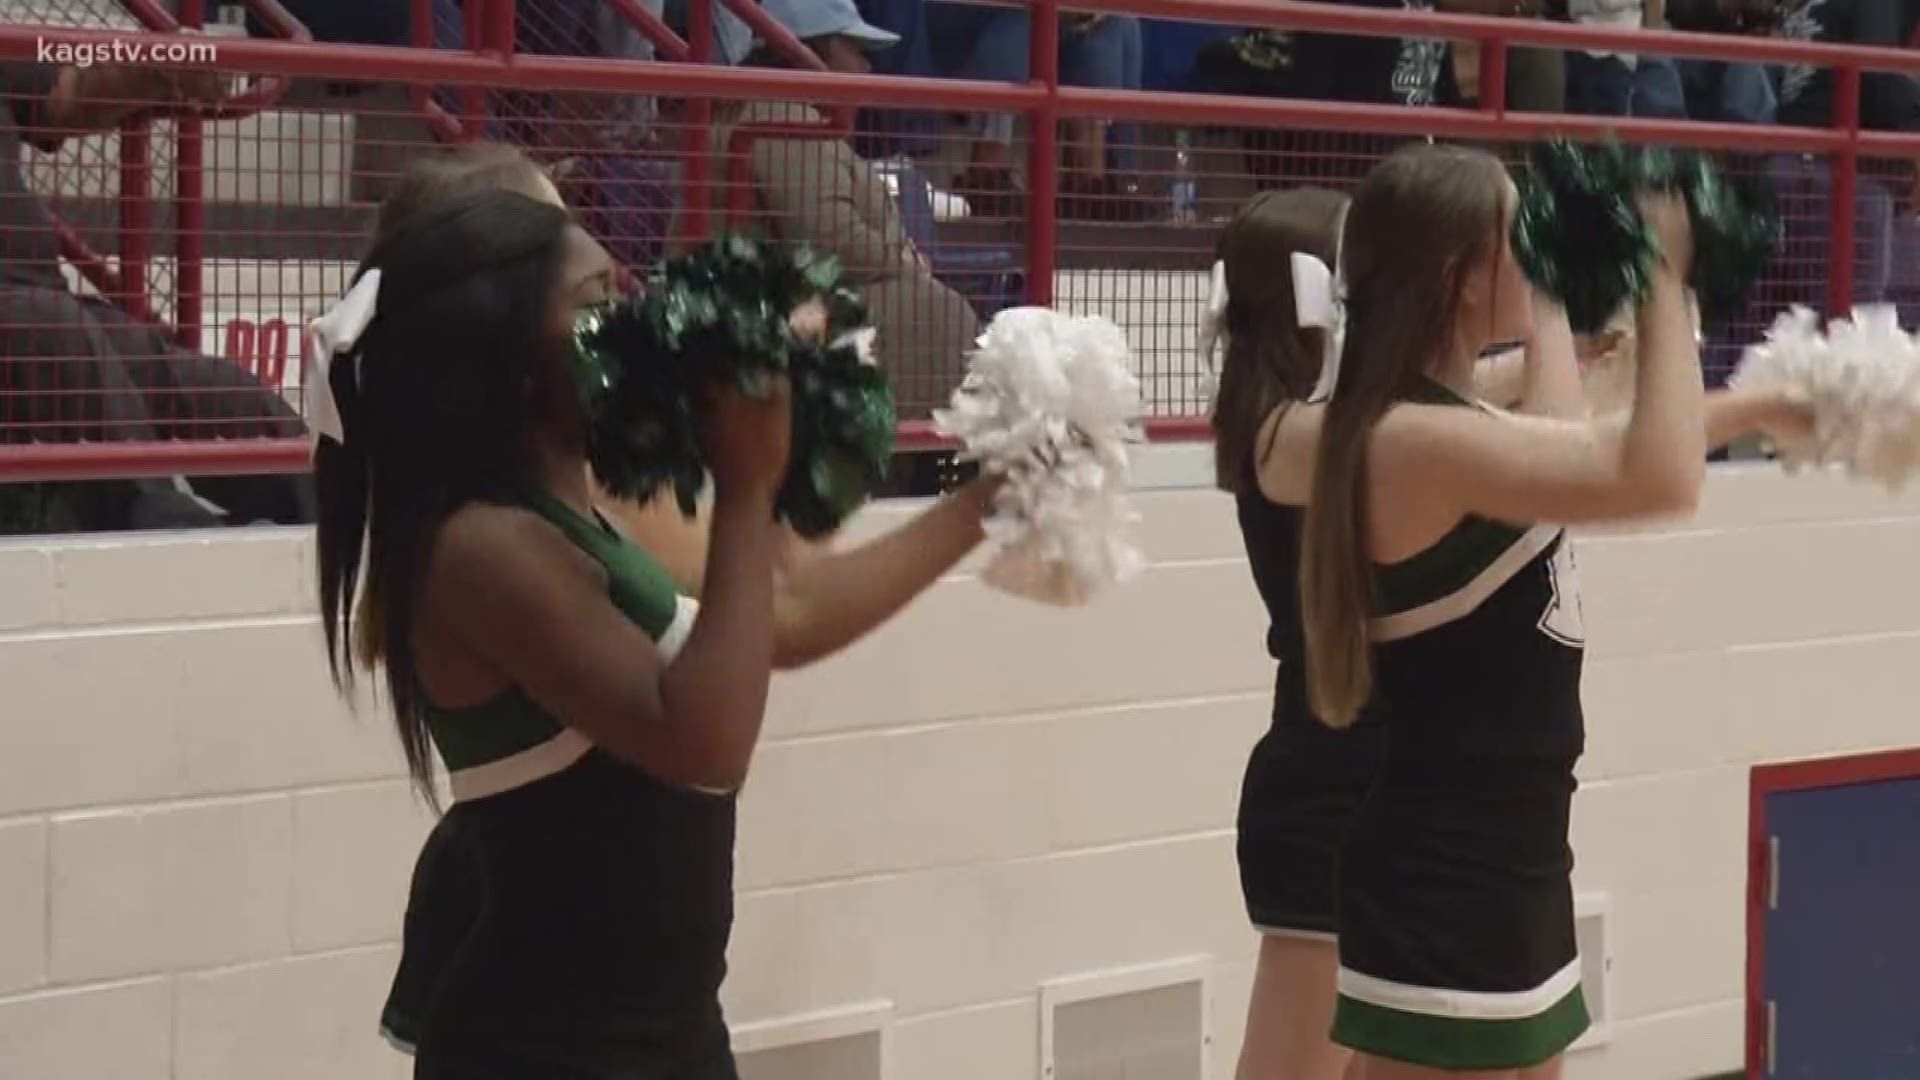 Tuesday night bi-district round scores and highlights from girls high school basketball.